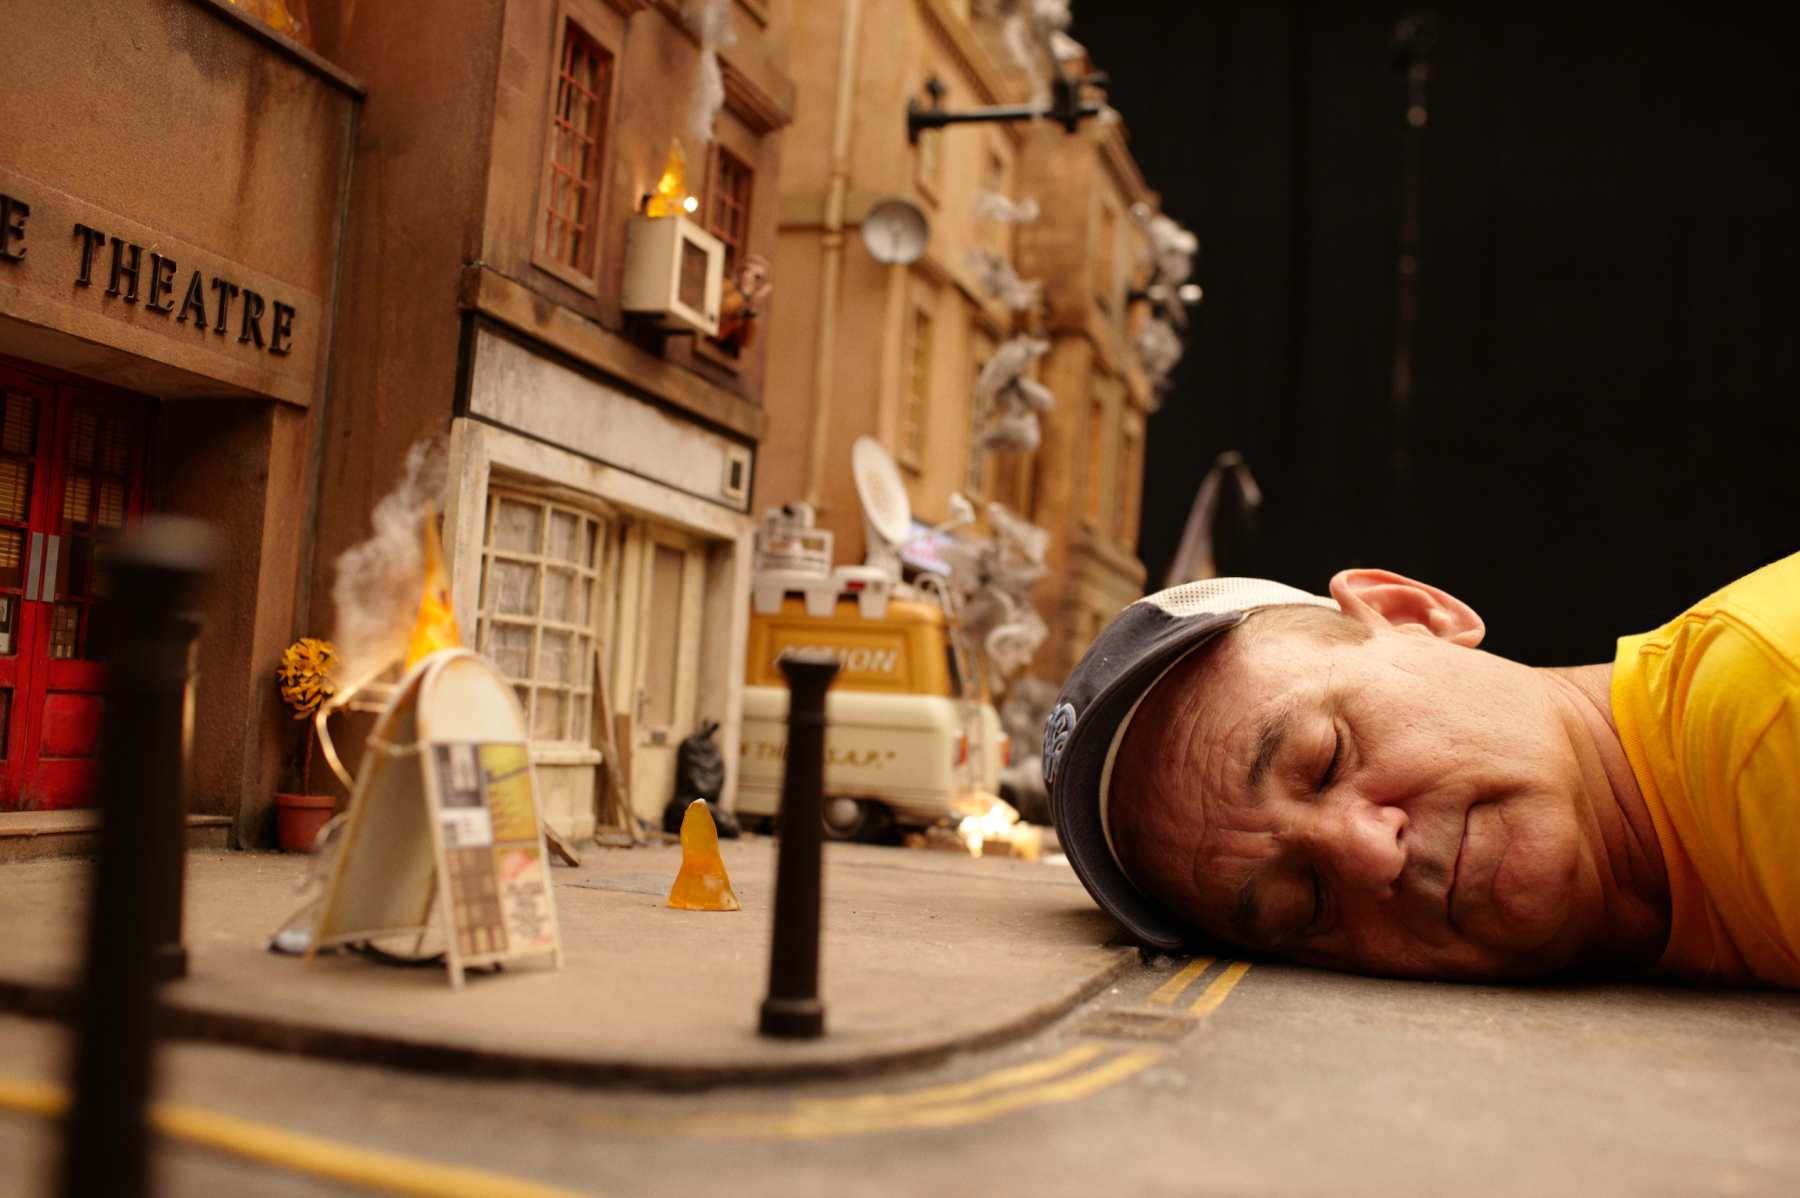 "Here’s Bill Murray on the set of <em>Fantastic Mr. Fox</em>, a stop-motion animation directed by Wes Anderson. I was only on set for a day. Bill and I were walking around the set and I got him to lie down in this sort of Lilliputian frame, which references <em>Gulliver’s Travels</em>. He’s doing nothing; he looks like he’s asleep, like this giant has had the biggest night out and has fallen asleep in a little village. There aren’t a lot of photos of mine that I have framed at home. But this is one of them because it’s a picture I keep looking at. It makes me chuckle every time I see it."<br>